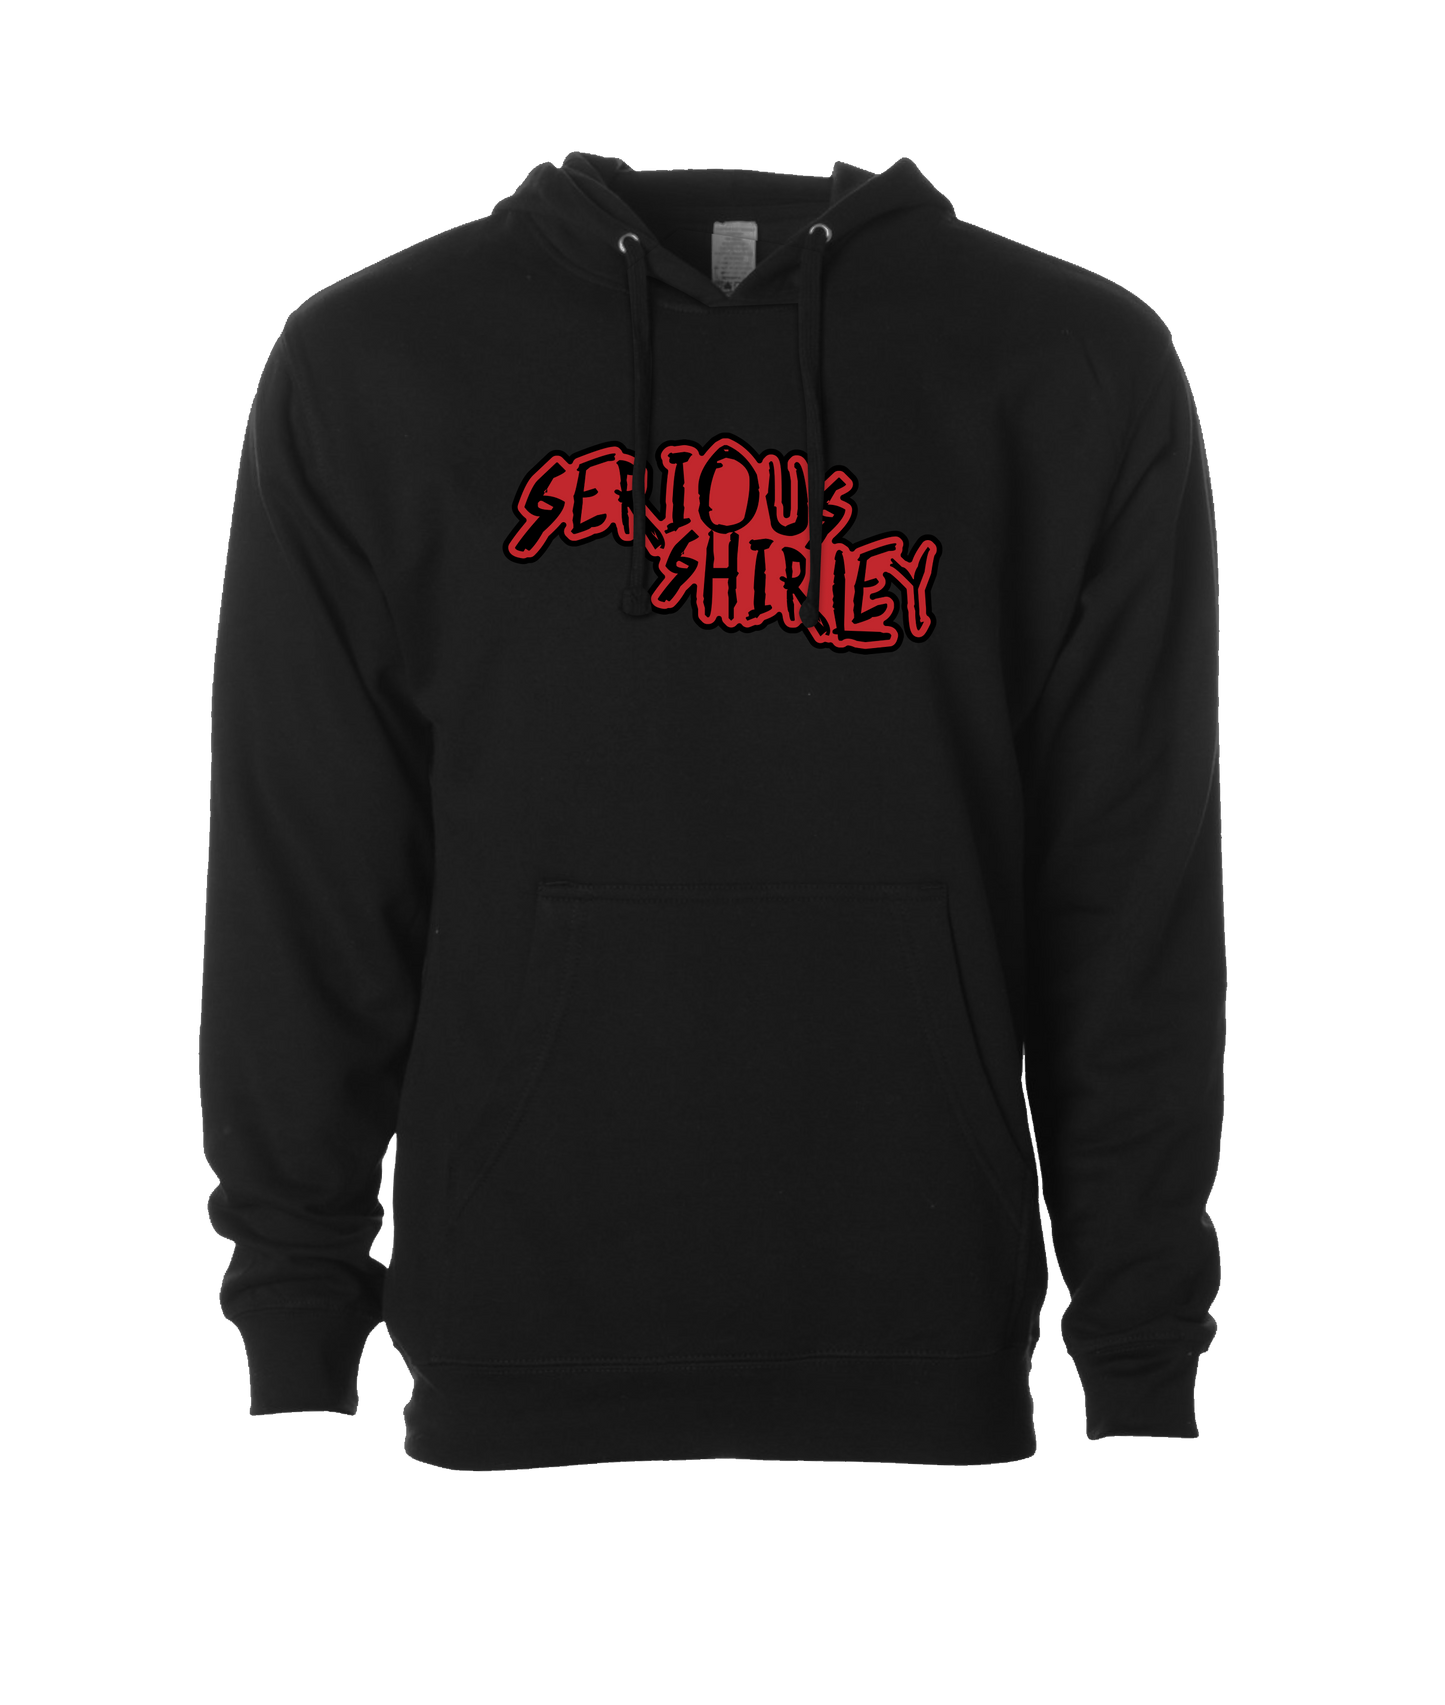 Serious Shirley - Red Scratch - Black Hoodie